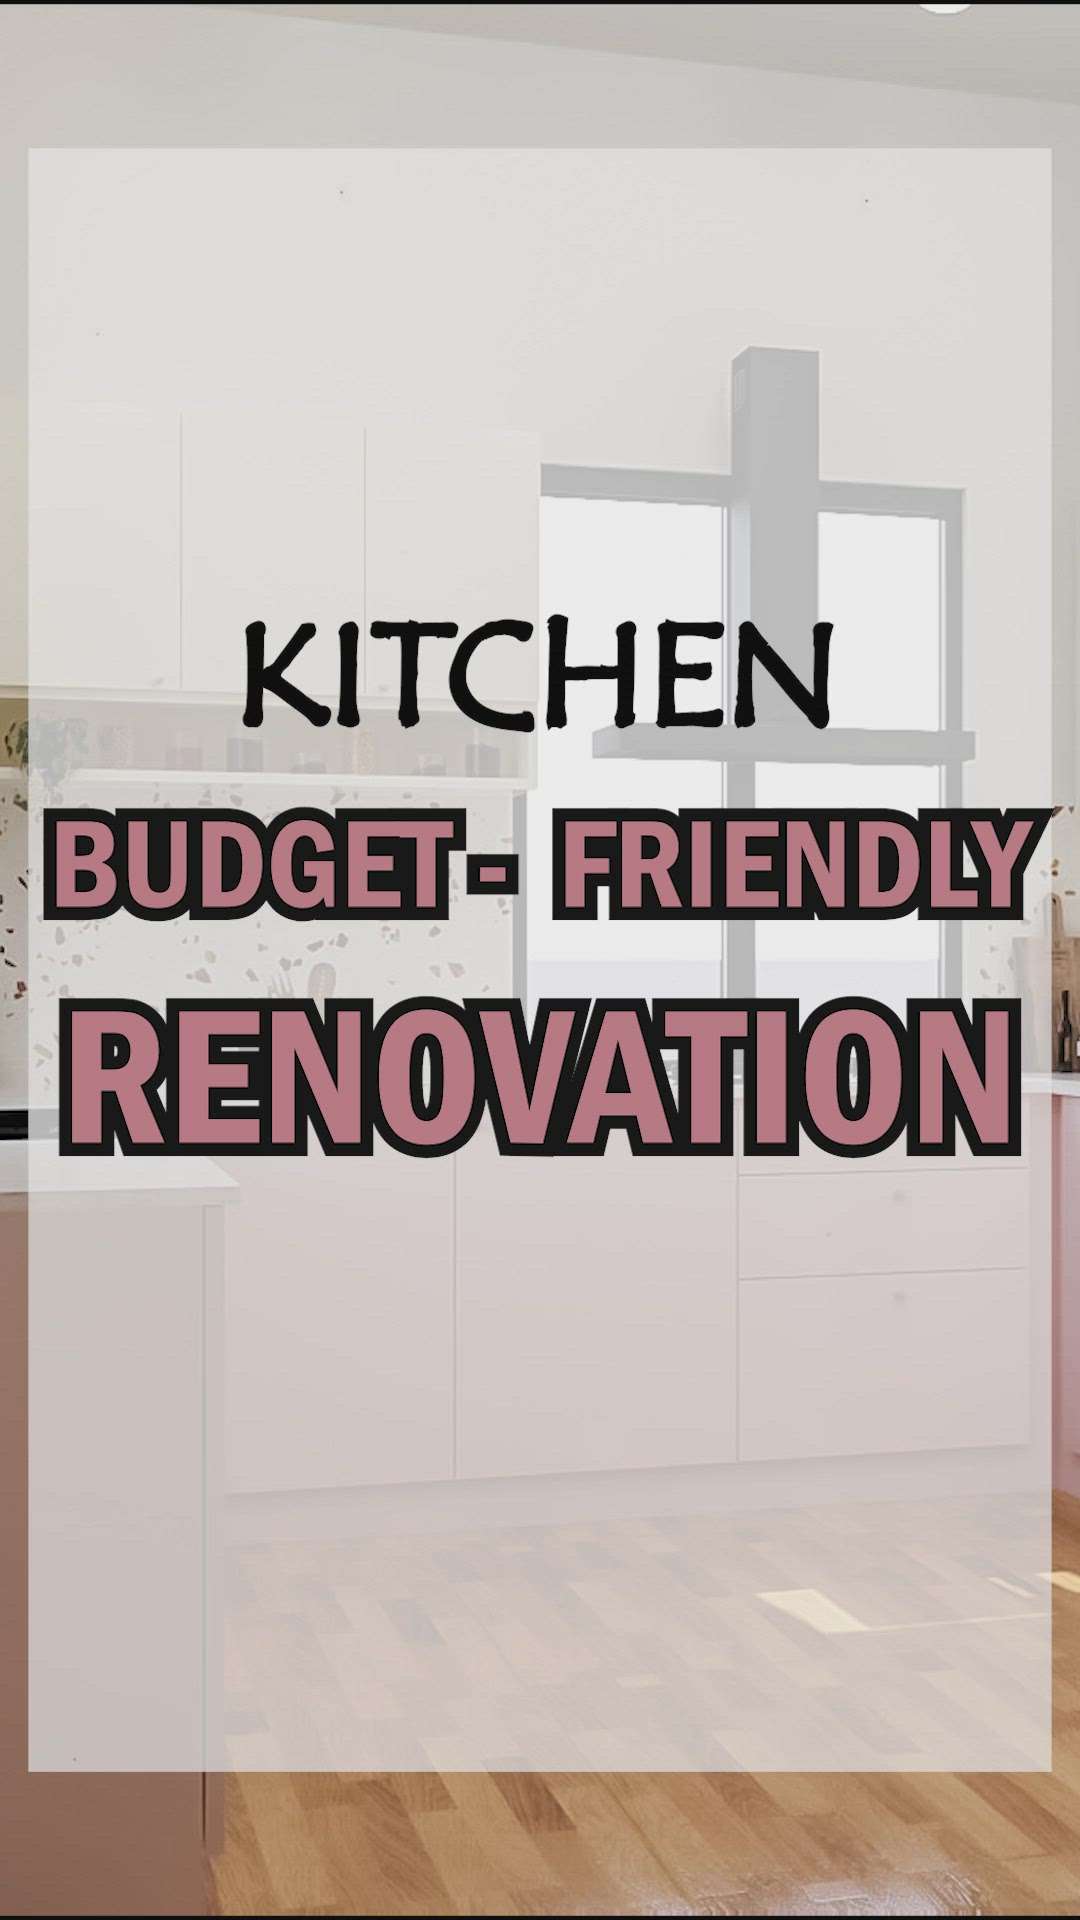 Don't skip this budget friendly kitchen design

#creatorsofkolo #renovation #beforeandafter #home #Budget
#kolo #creators #kolocreator #Kitchen #interior #KitchenInterior #KeralaStyleHouse #keralahouse #kitcheninterior #bluekitchen #openkitchen #designinterior #interiordesigner #creatorsofkolo #kitchen #Ernakulam #KeralaStyleHouse #pastelkitchen #pastelcolors #nanoehite #modernkitchen #designerkitchen #budgetfriendly #budgetfriendlykitchen #minimalkitchen #whitekitchen #stylishkitchen #smallkitchen #tallunit #marineplywoodkitchen #marineply